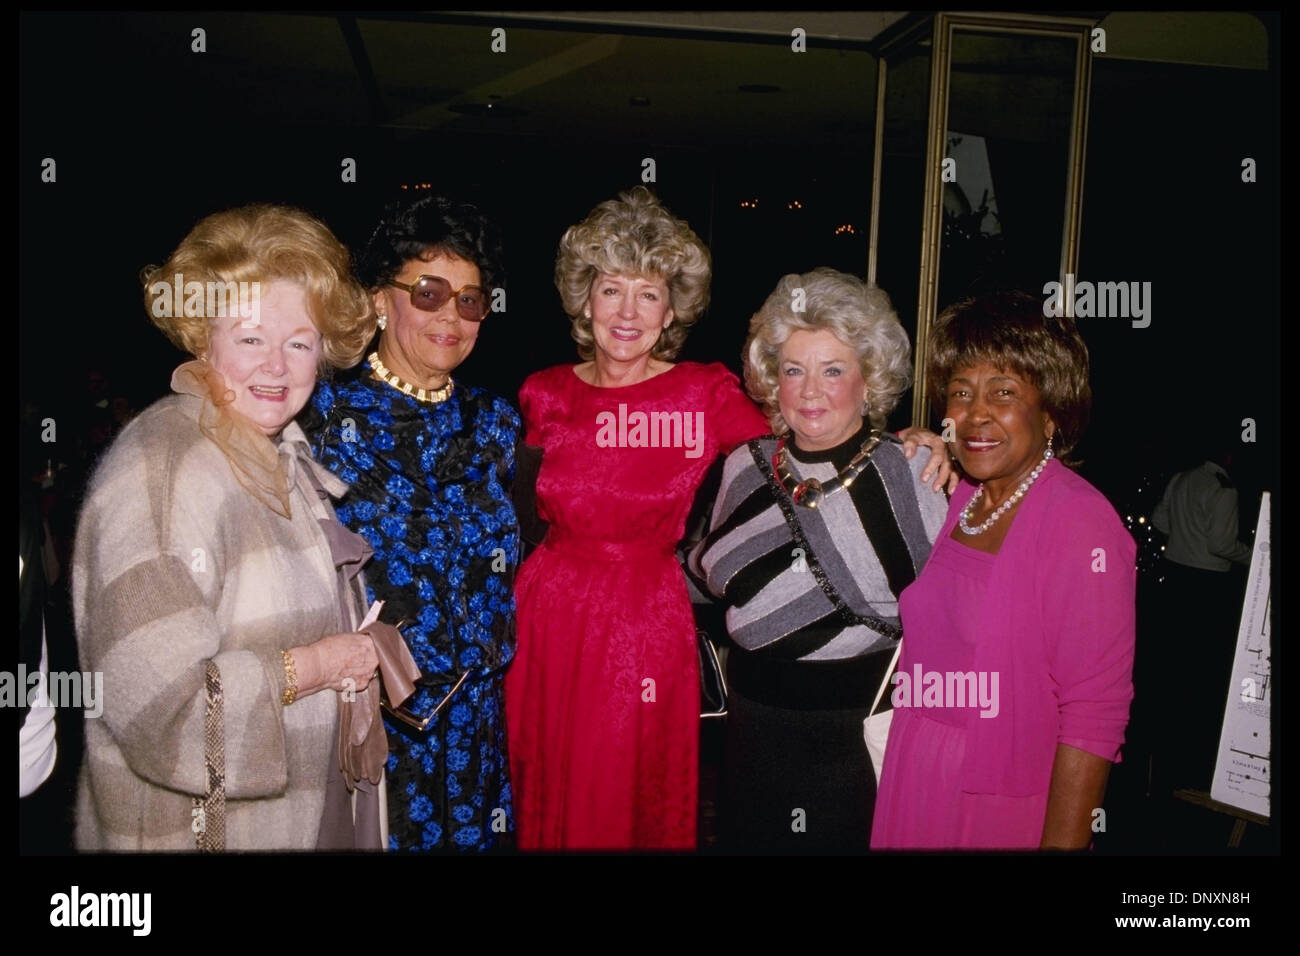 Hollywood, CA, USA;  ZELMA BULLOCK(Tina Turner's mother), PHYLLIS QUINN, GEORGIA HOLT(Cher's mother), MABEL JOHNSON (Diahann Carroll's mother) and DOROTHY RITTER (John Ritter's mother) are shown in this undated photo. (Michelson - Roger Karnbad/Date unknown) Mandatory Credit: Photo by Michelson/ZUMA Press. (©) Copyright 2006 Michelson Stock Photo